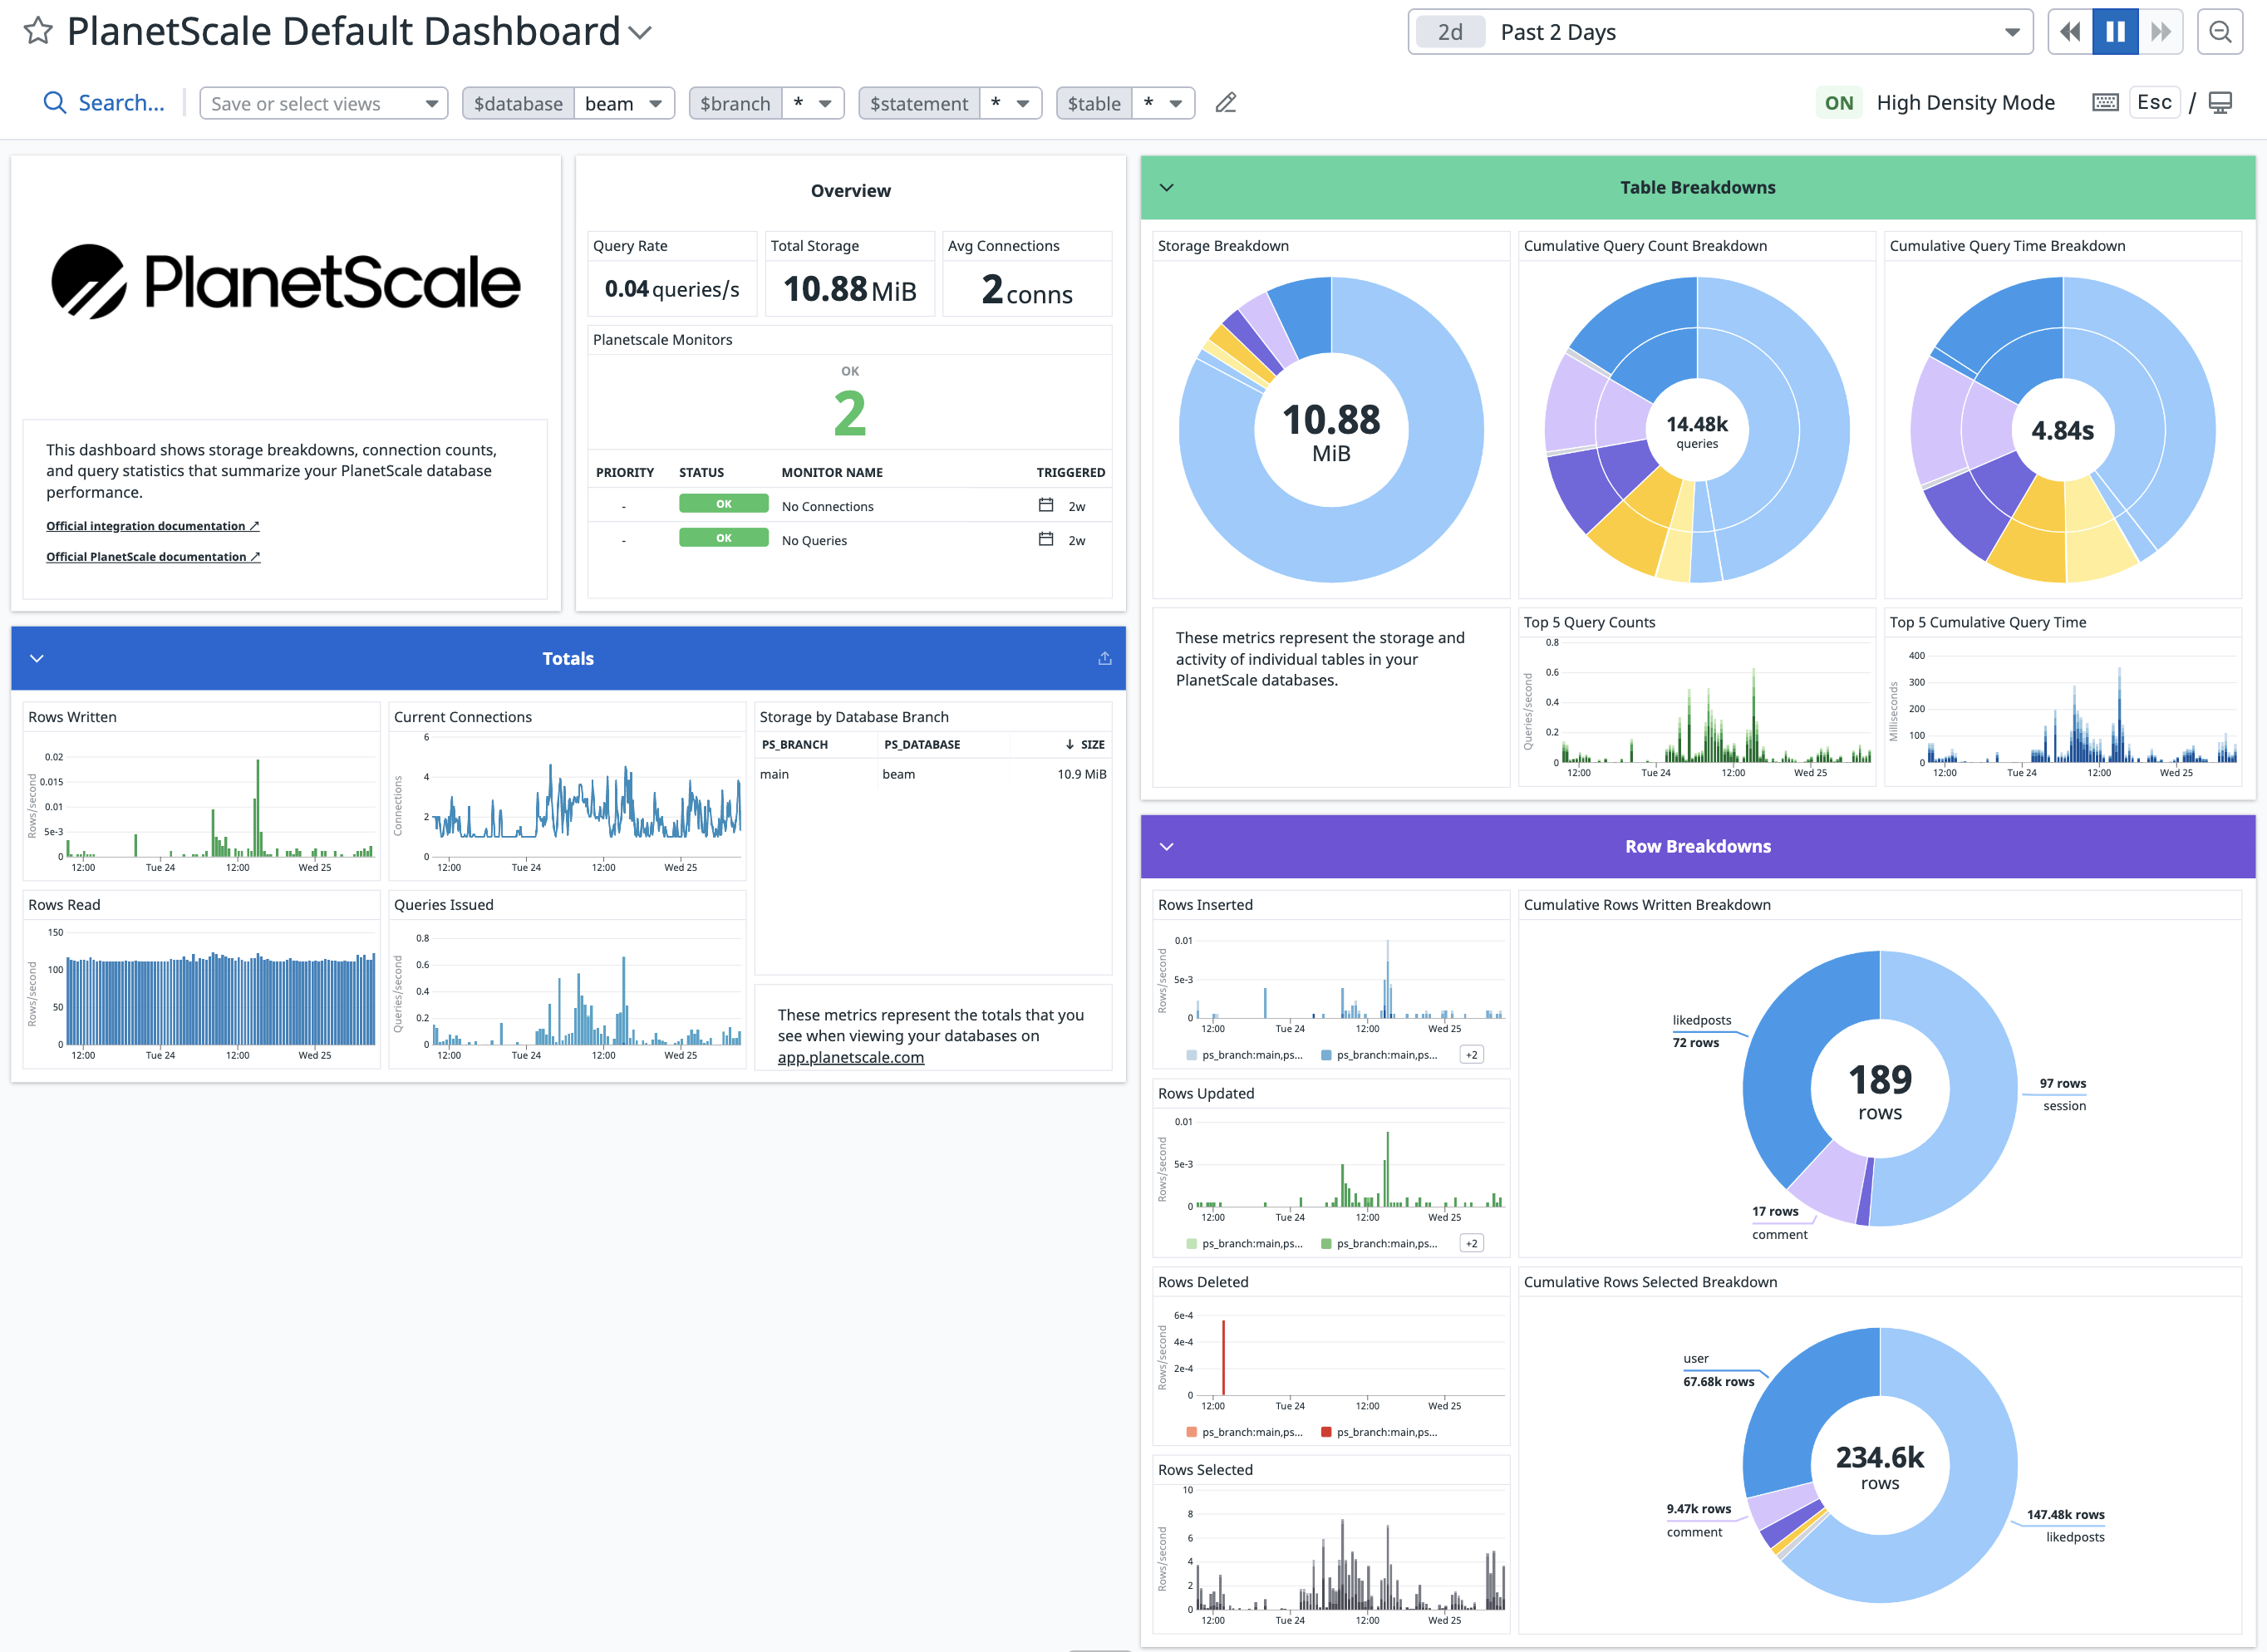 Image of the PlanetScale Default Dashboard in Datadog showing overview metrics, table and row breakdowns, info about connections, and query rates